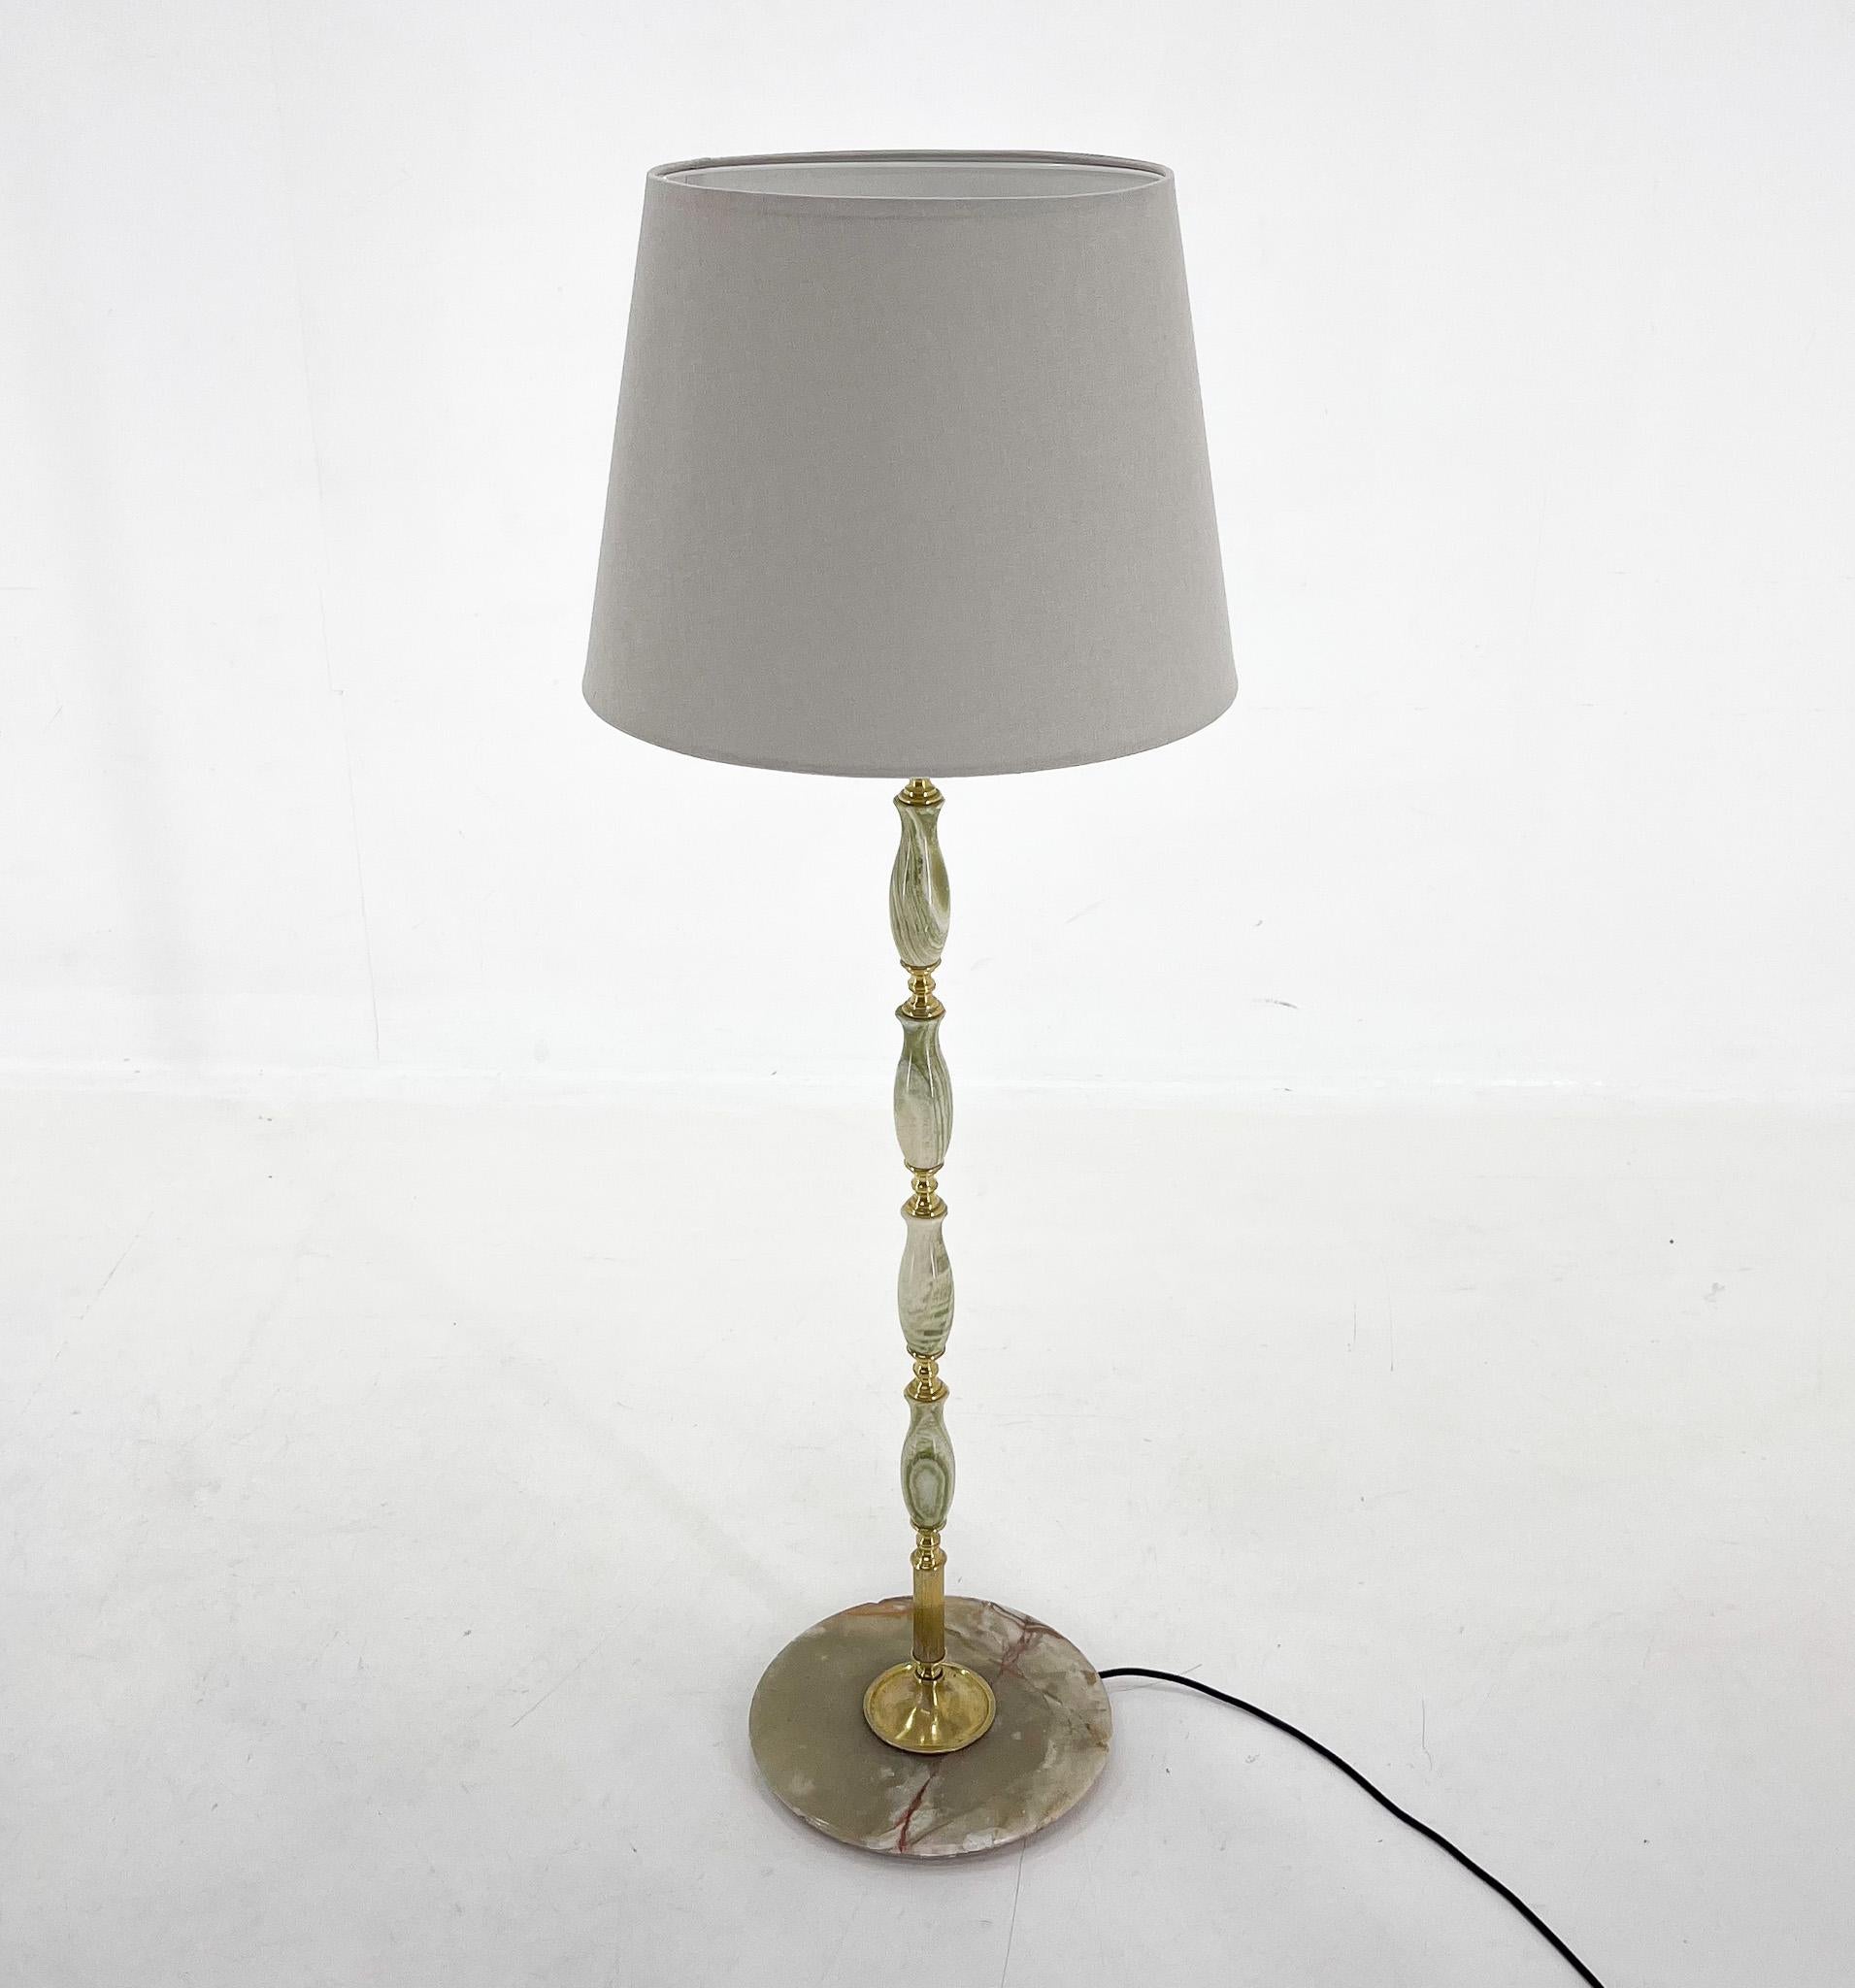 Italian mid-20th century floor lamp with onyx and brass base and leg. The shade has been replaced with a new one. The lamp has 3 E26-E27 bulbs. There are two switches that can be used to light one, two or all three bulbs separately (see photo). New